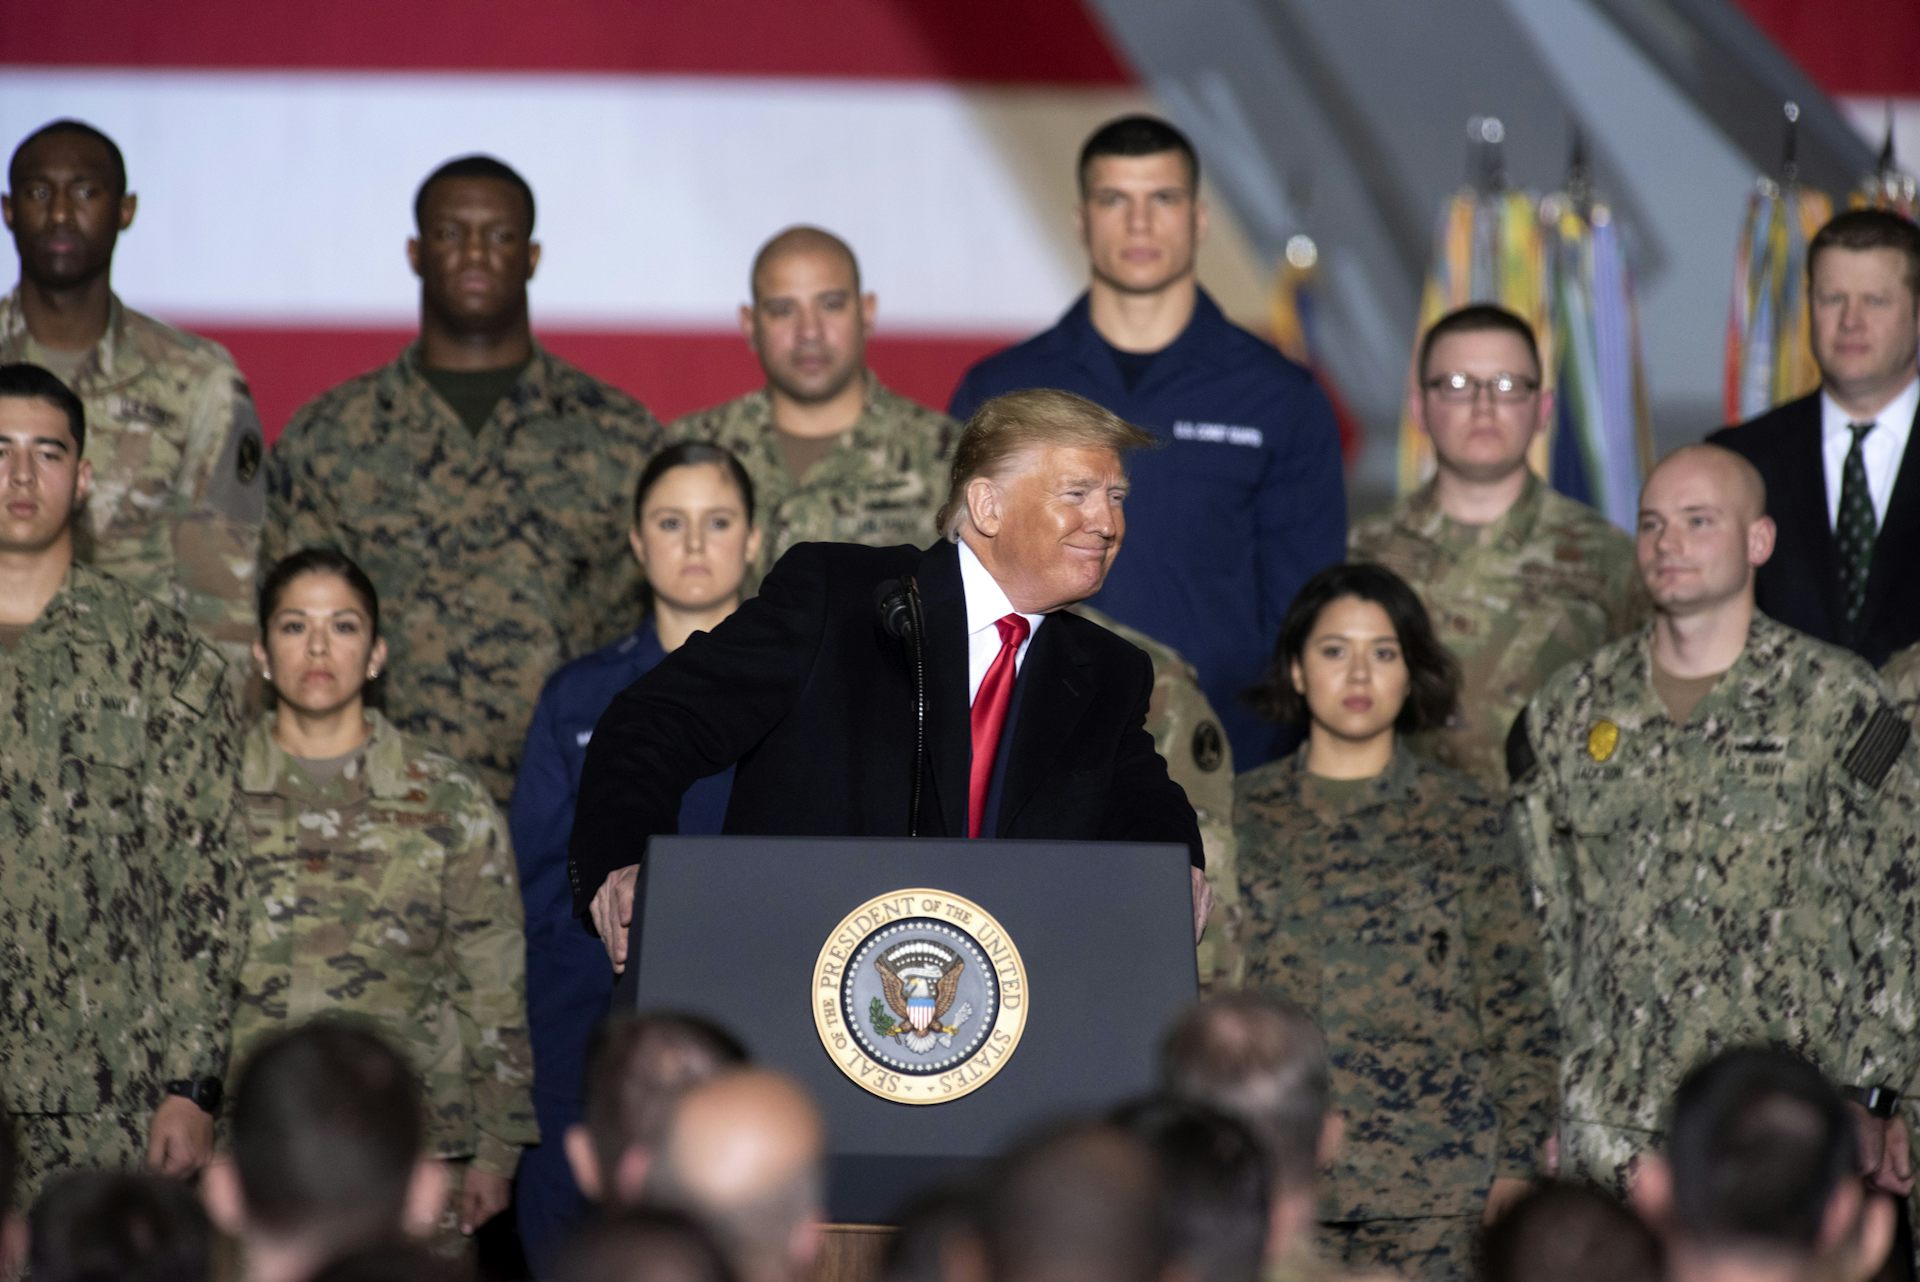 Trump Treats the Military as His Own – and the Troops Could Suffer